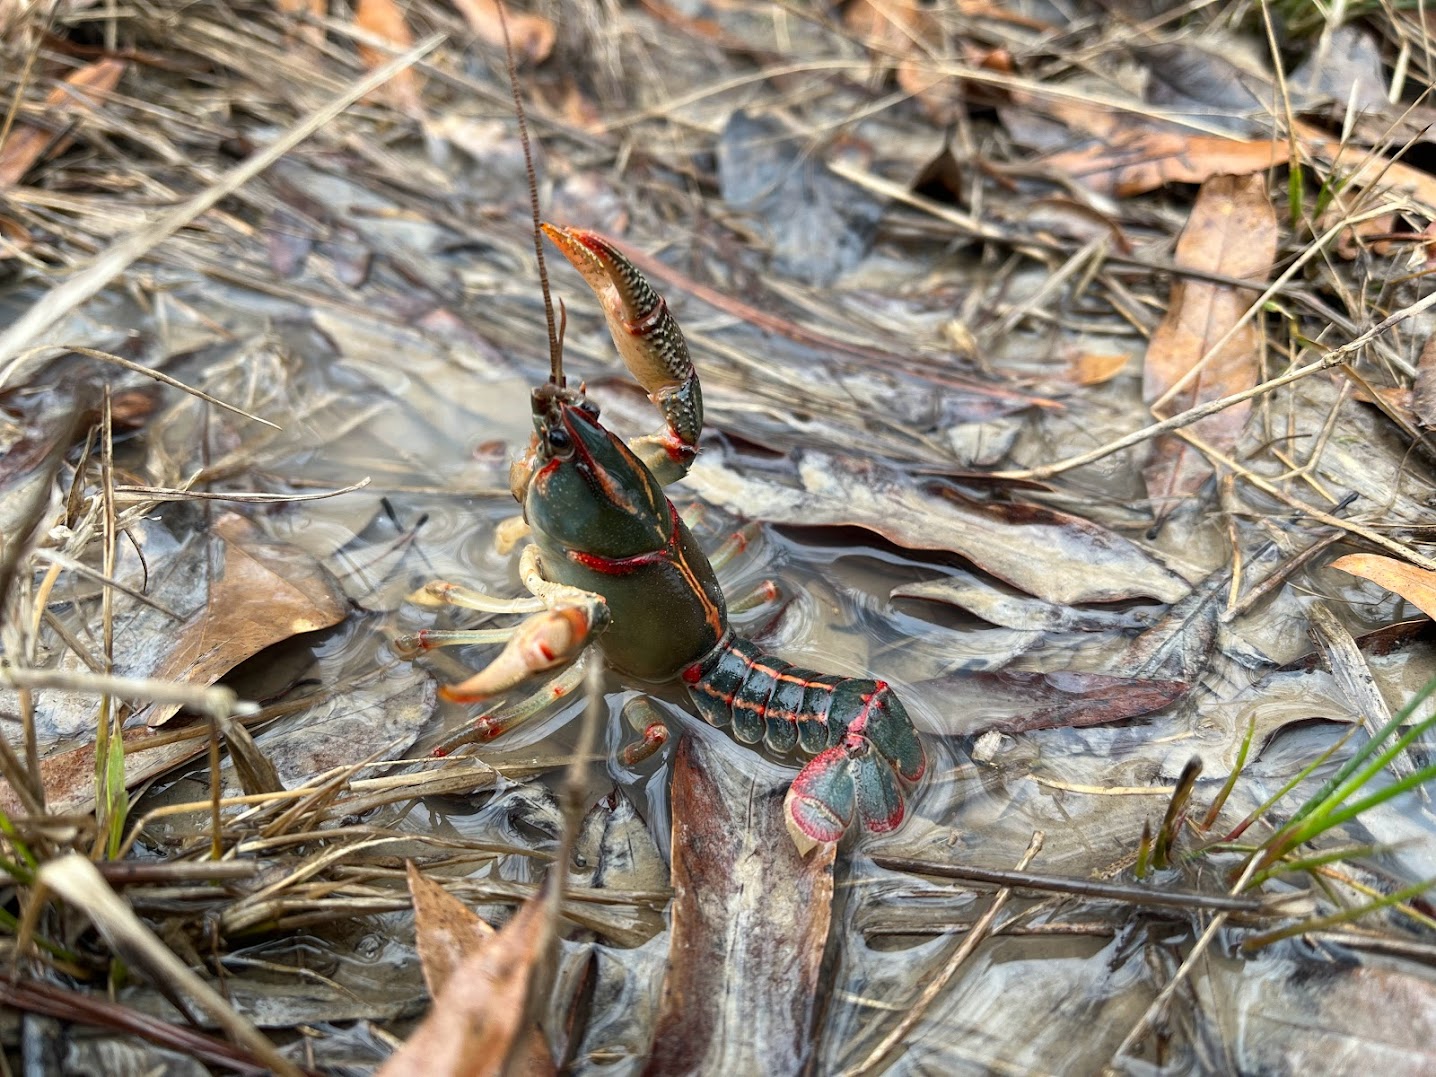 A "painted devil" crawfish brandishes its claws in the air.